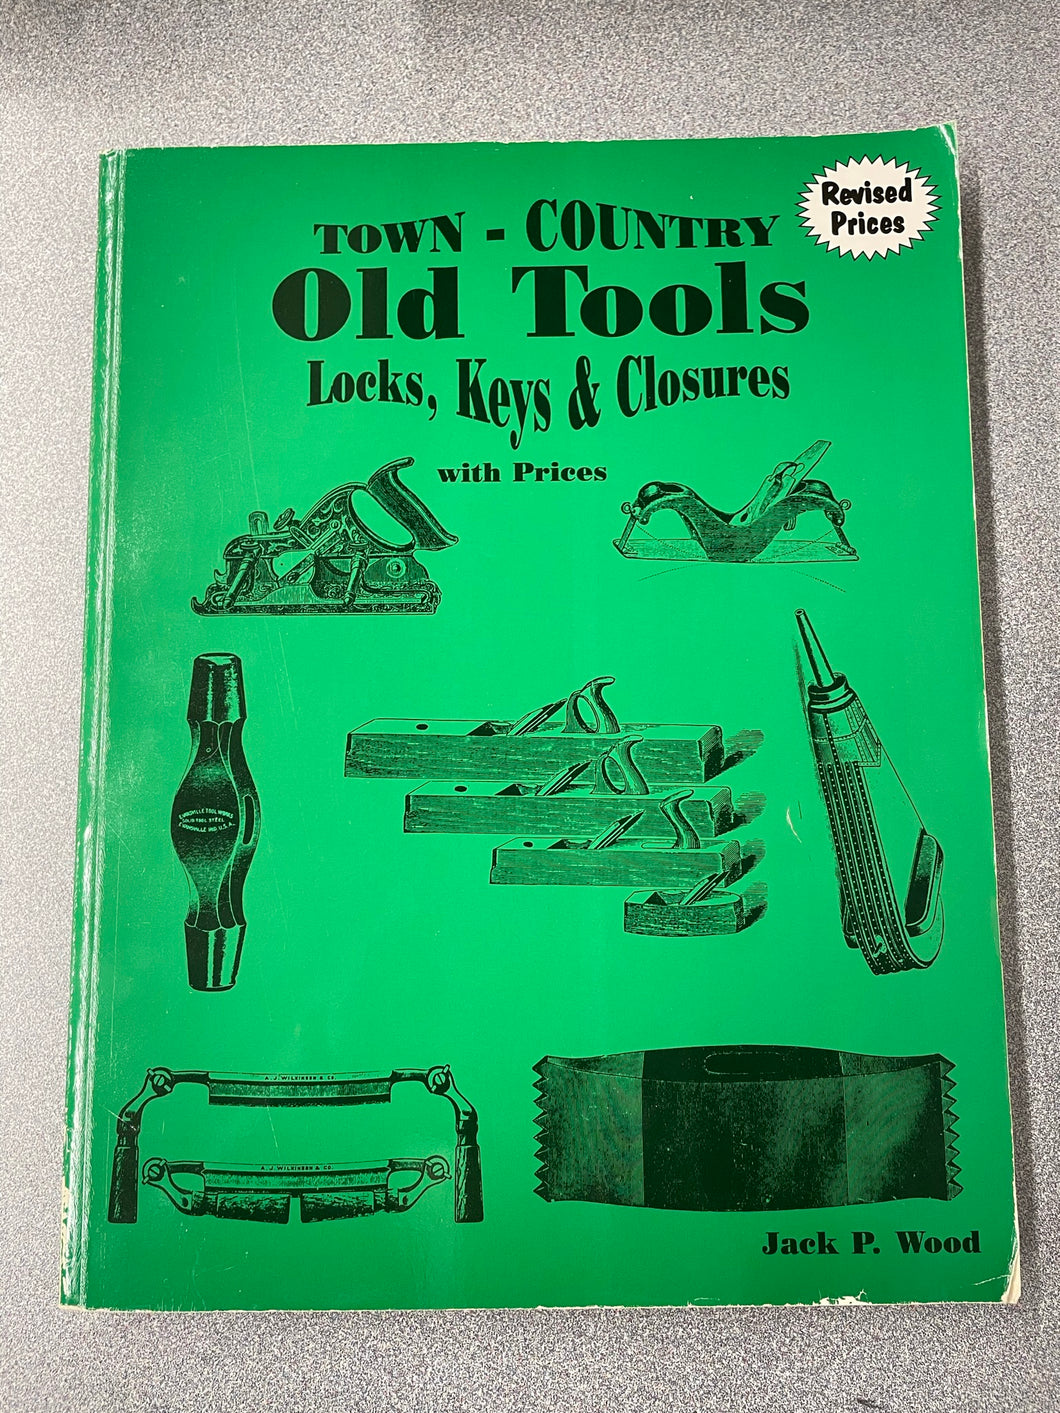 Town-Country Old Tools, Locks, Keys and Closures With Prices, Wood, Jack P. [1990] VA 4/23